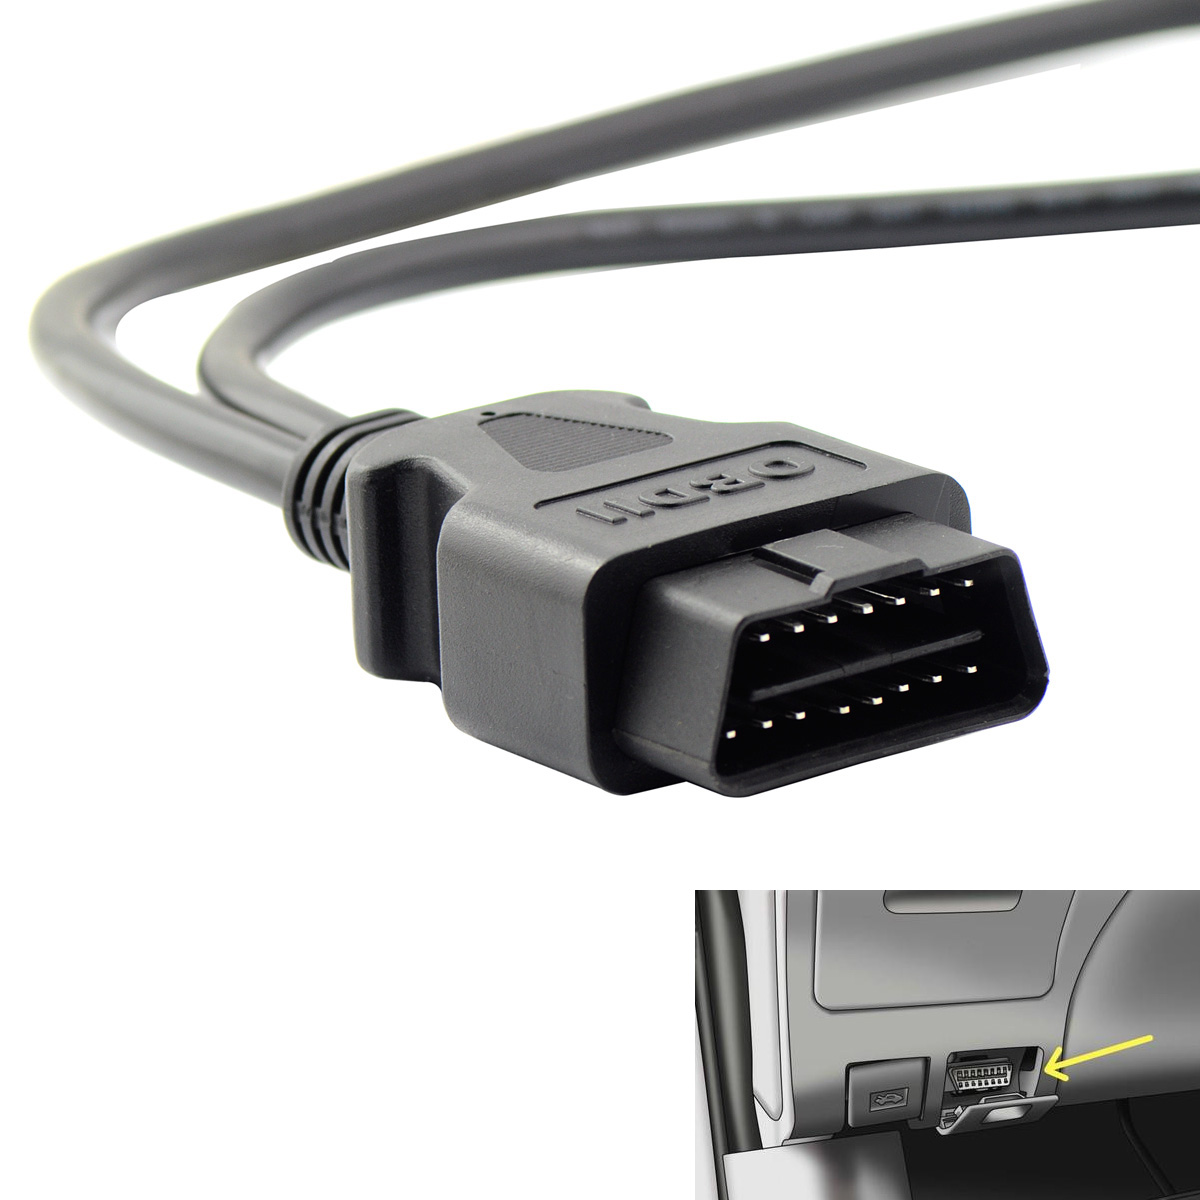 16pin OBDII YSplitter Cable with Underdash Bracket for KIA Mazda - Click Image to Close